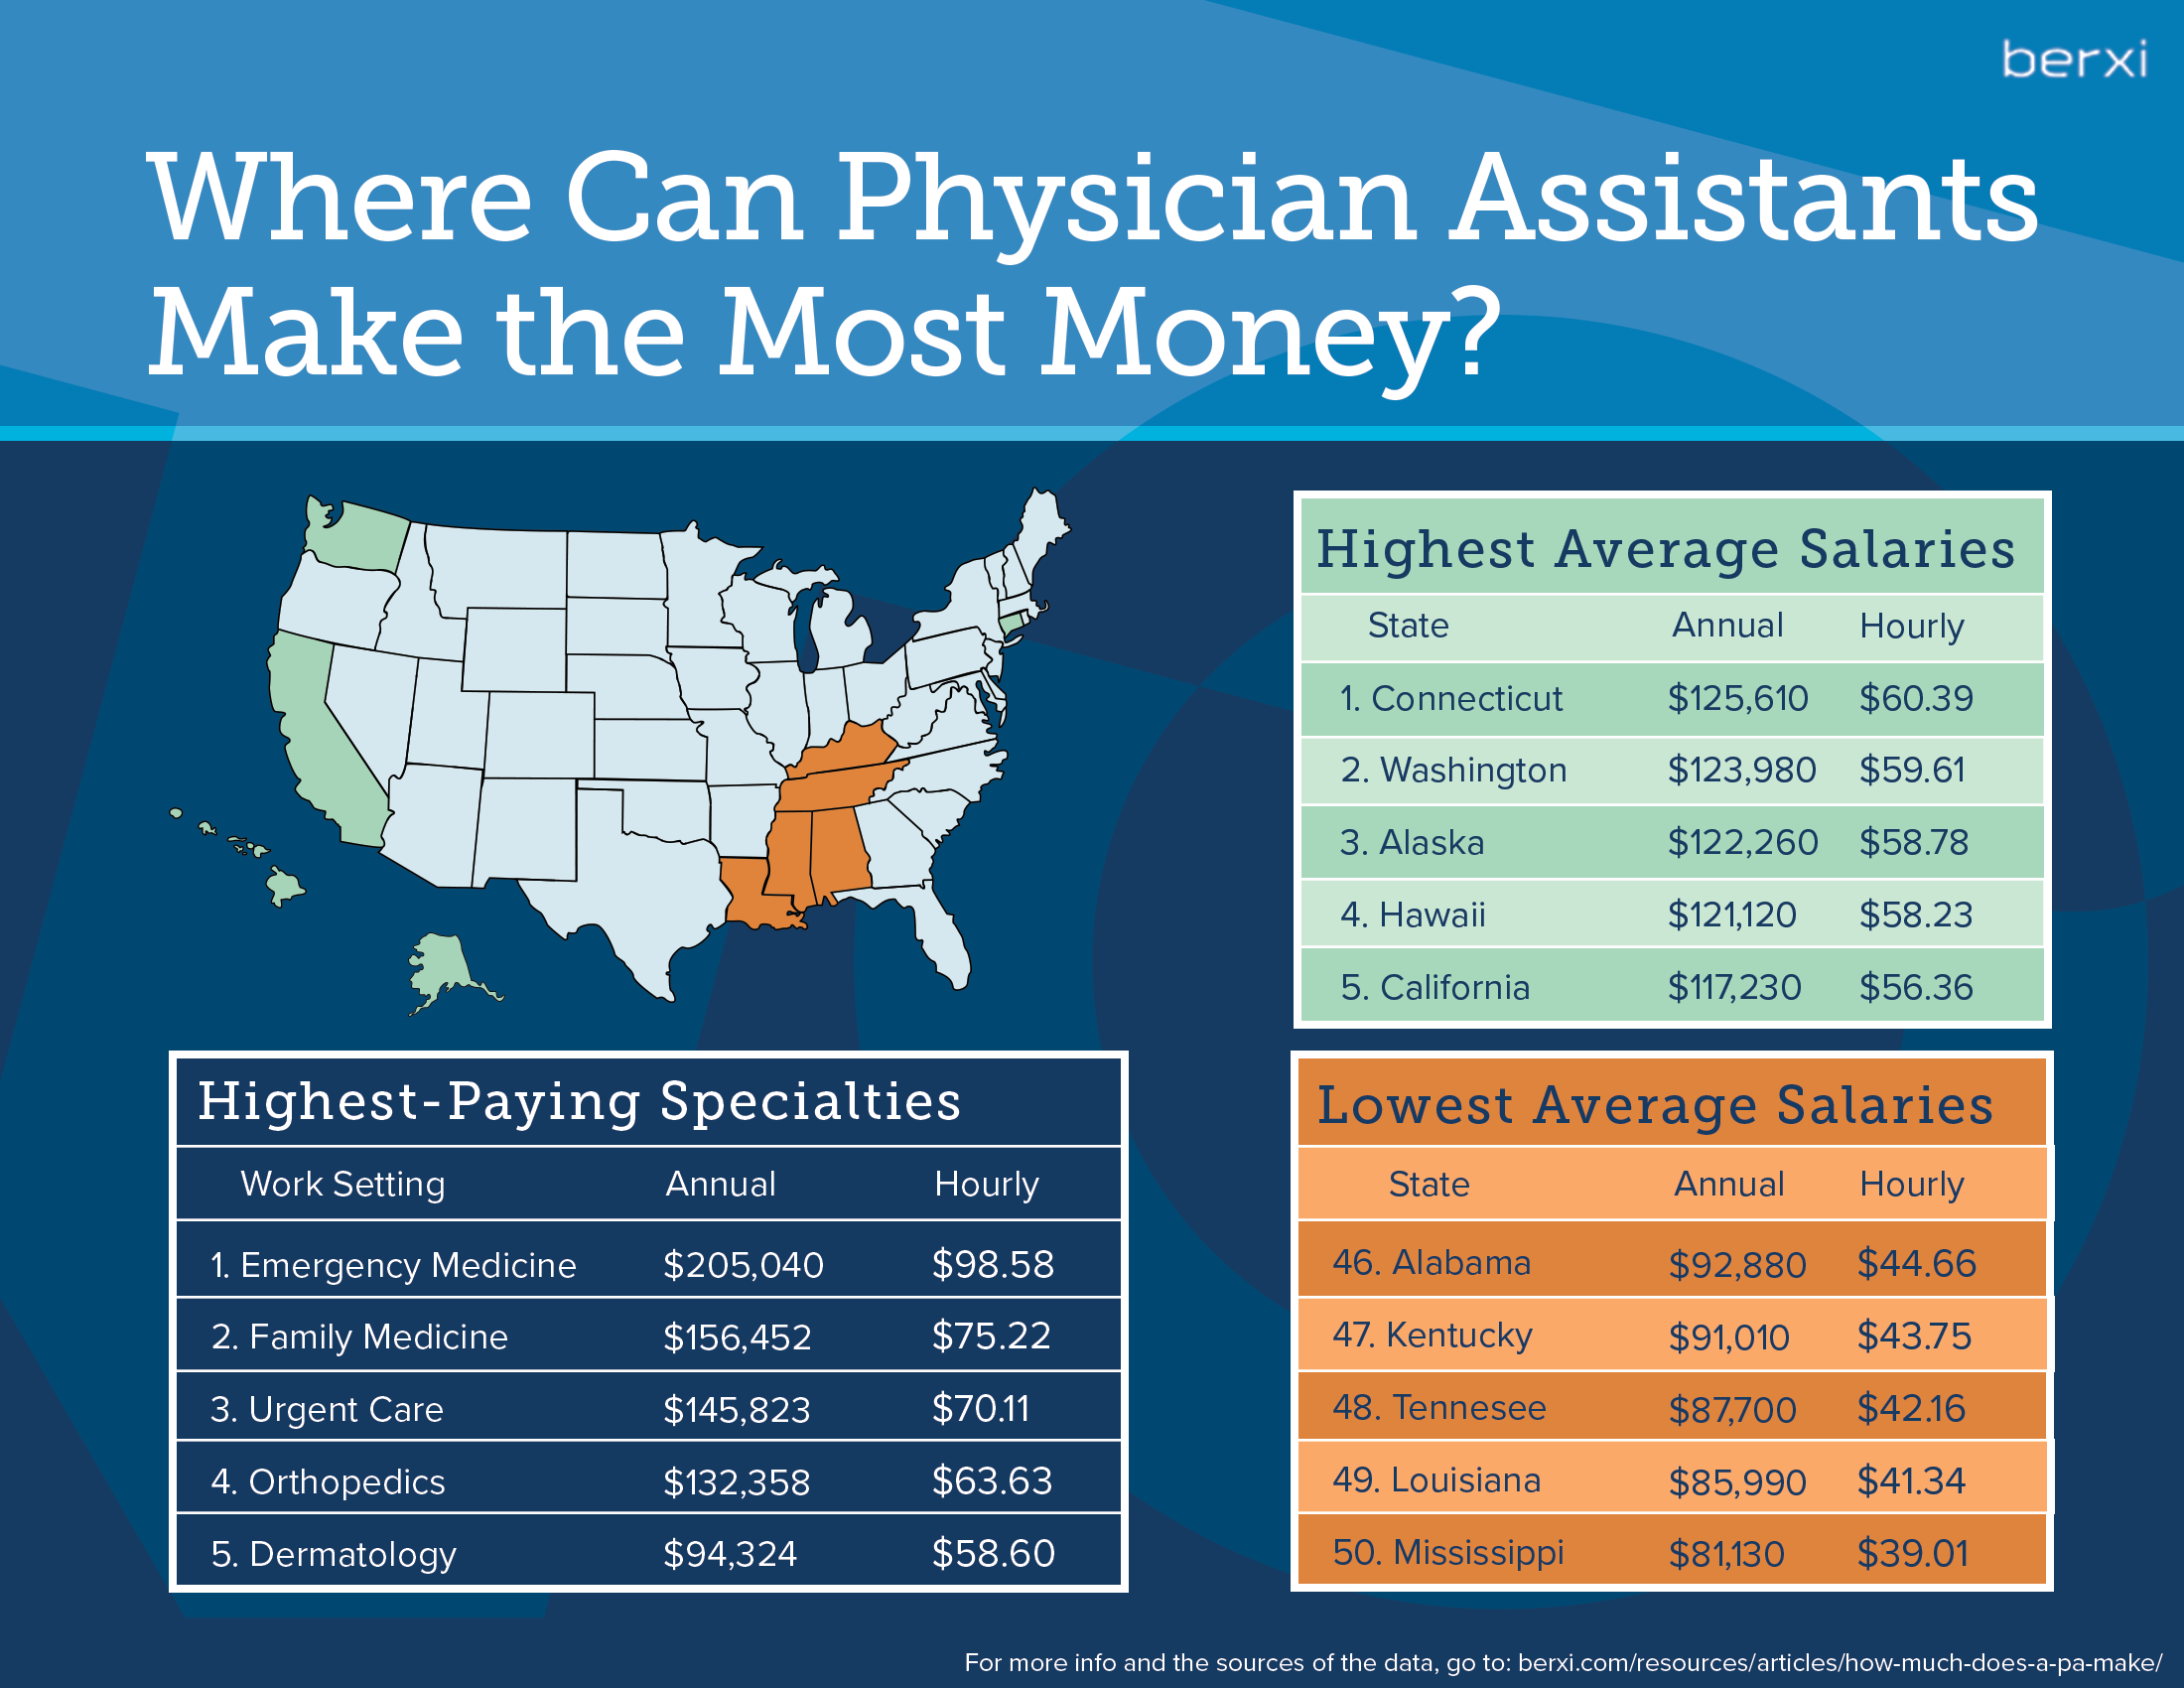 Where physician assistants can make the most and least money by state and specialty